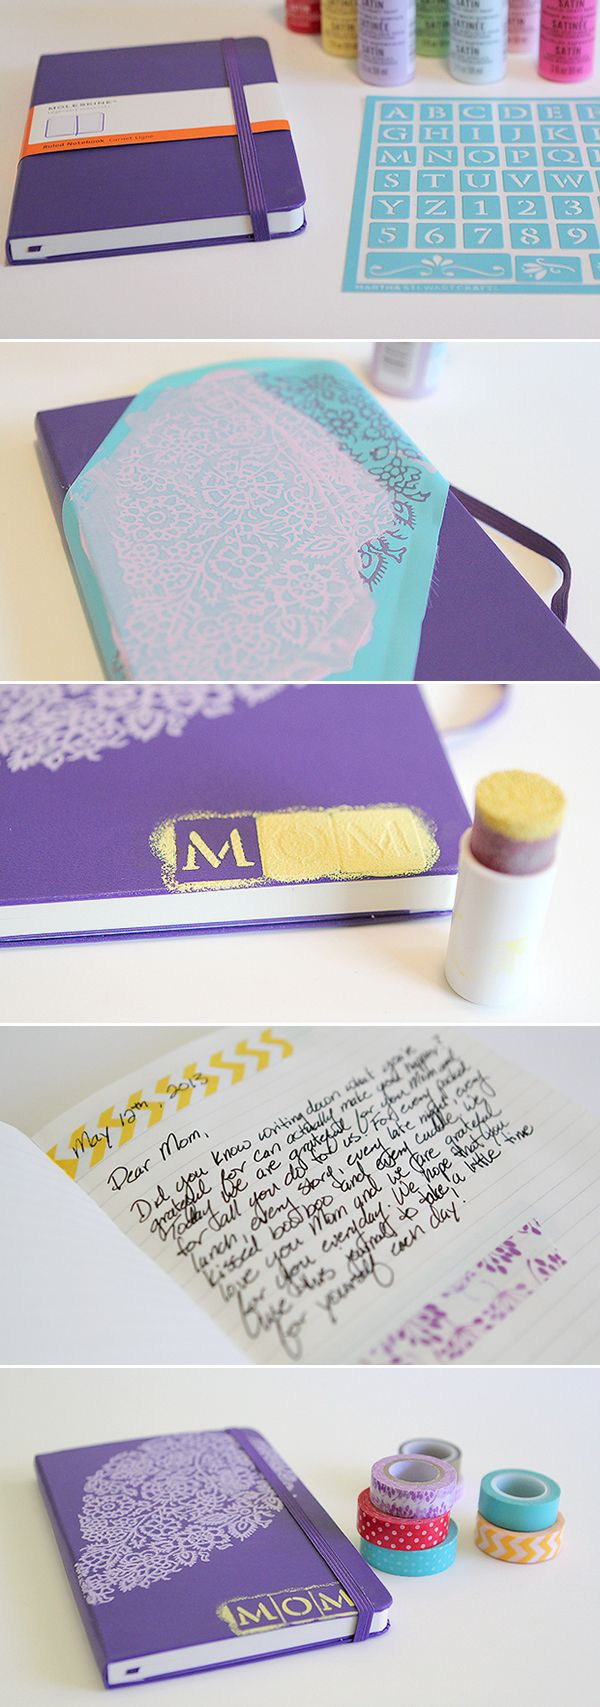 diy gifts for mum